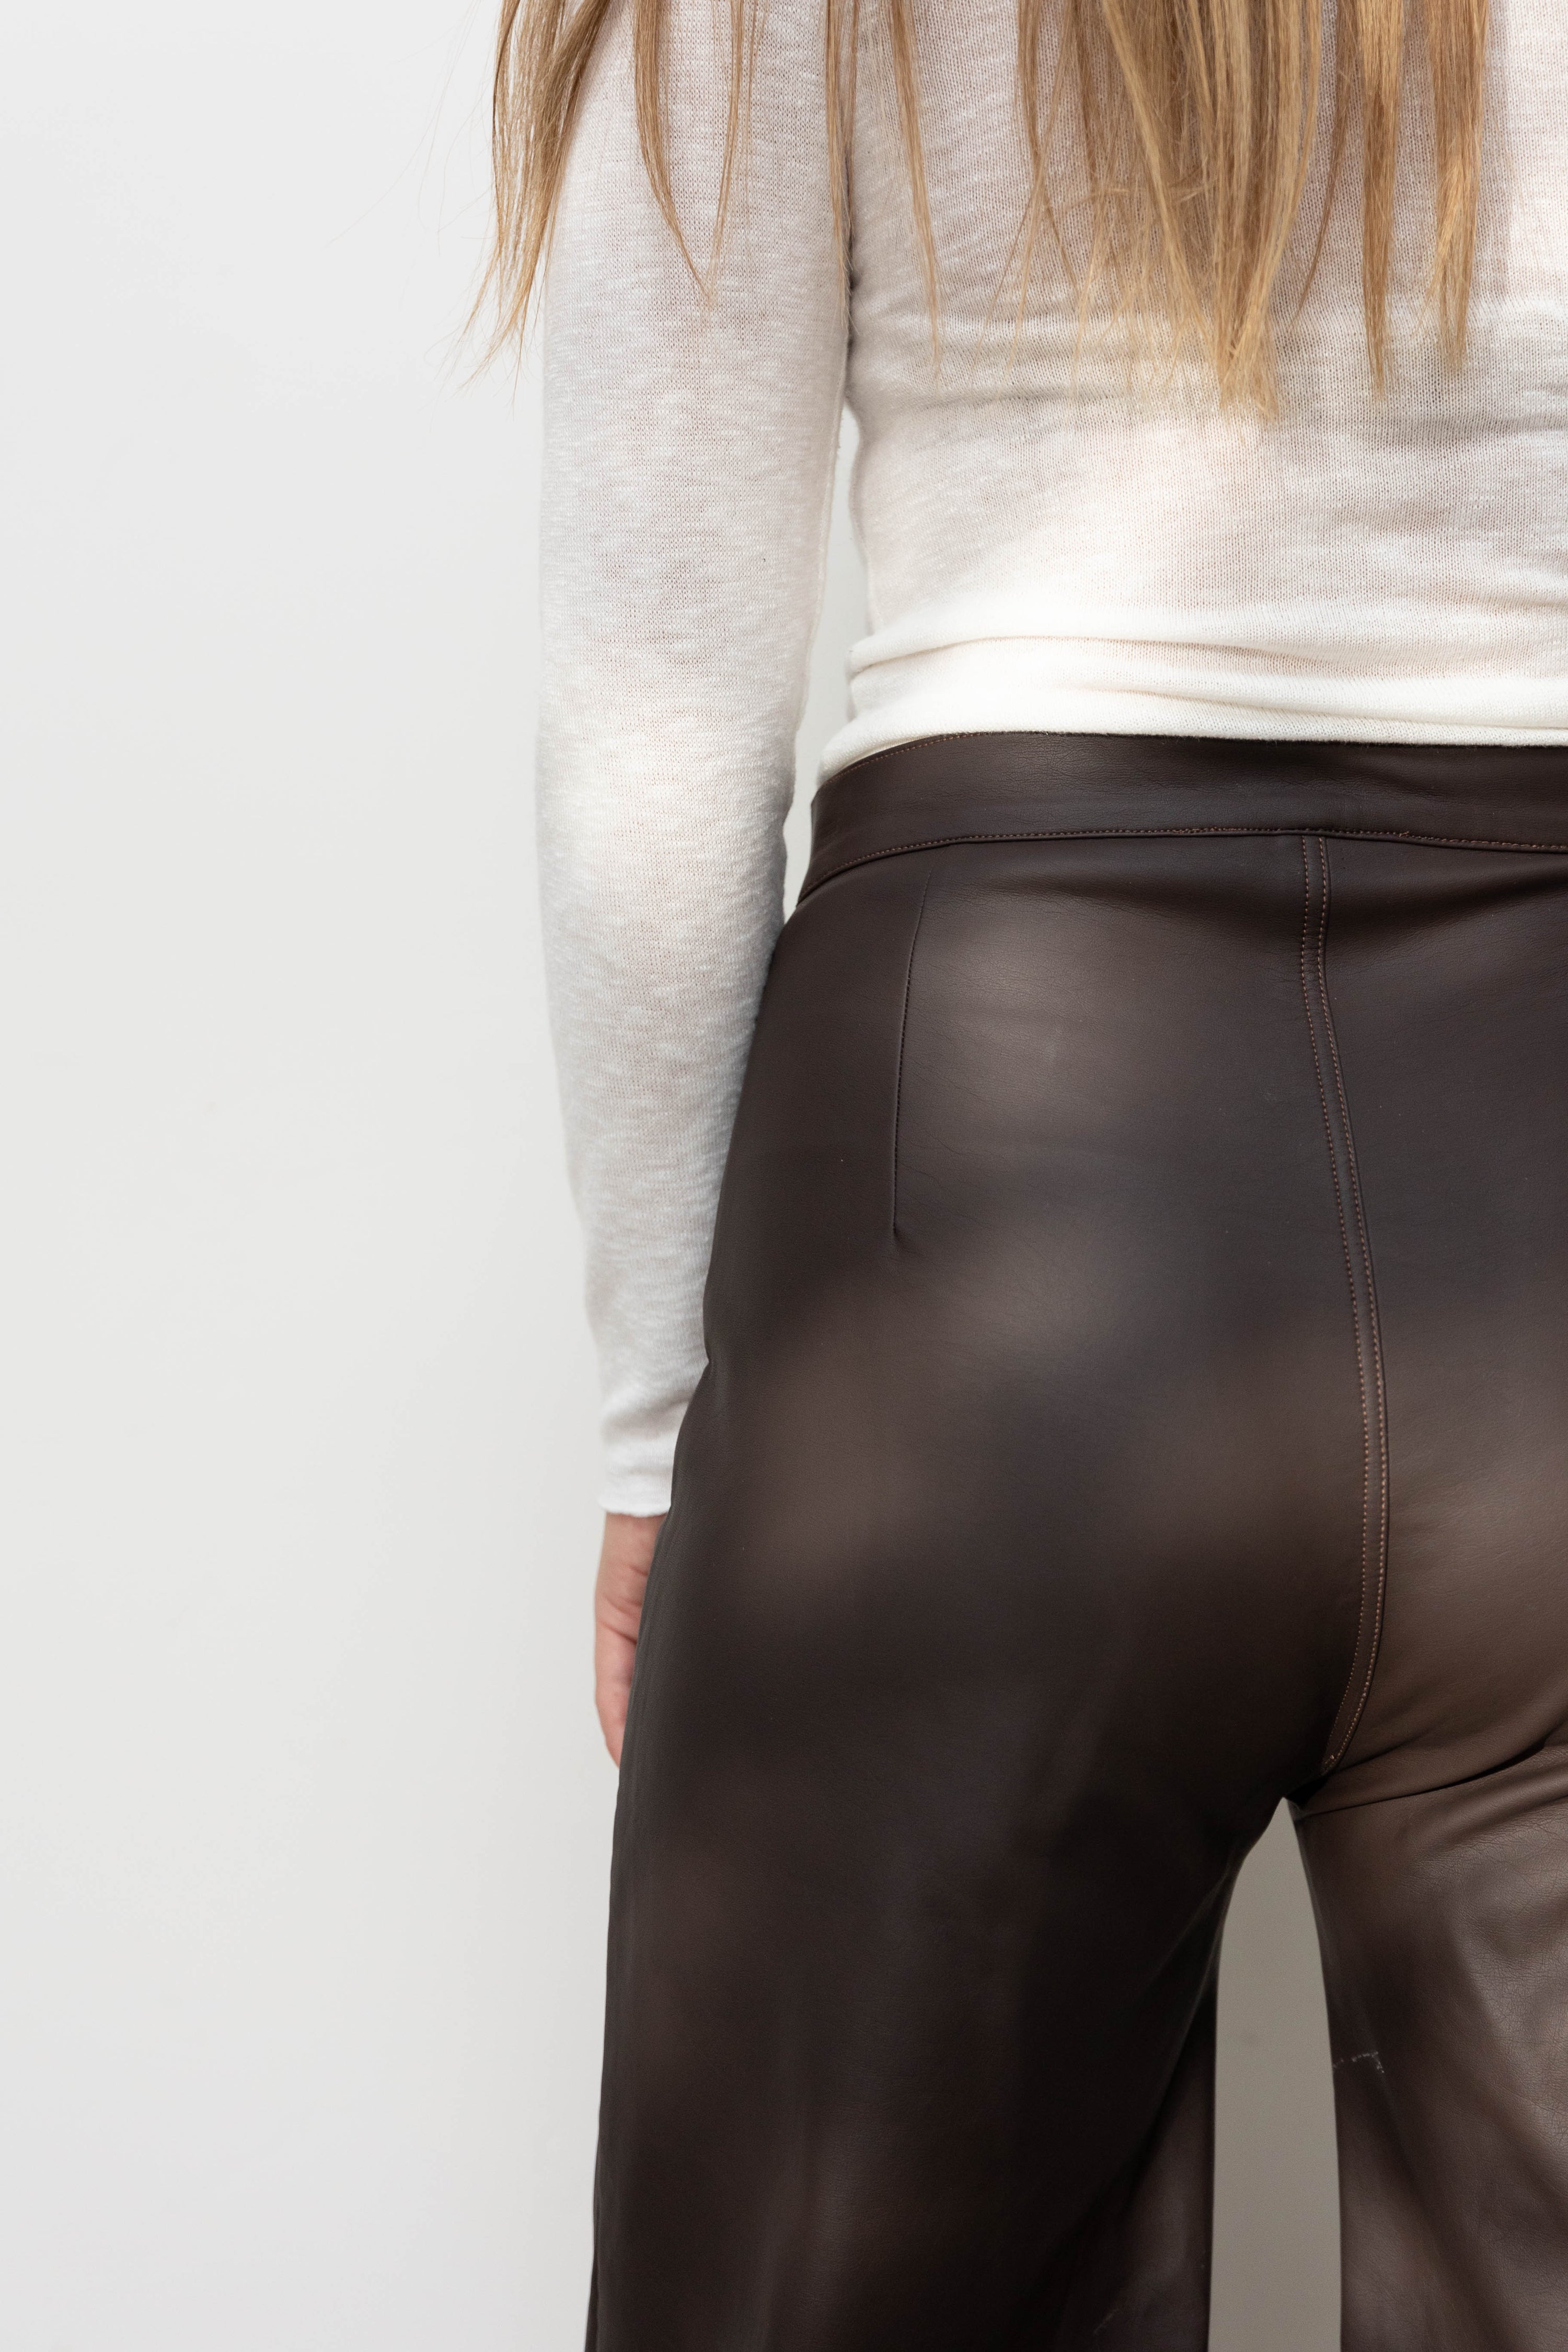 Brown Faux Leather Pant